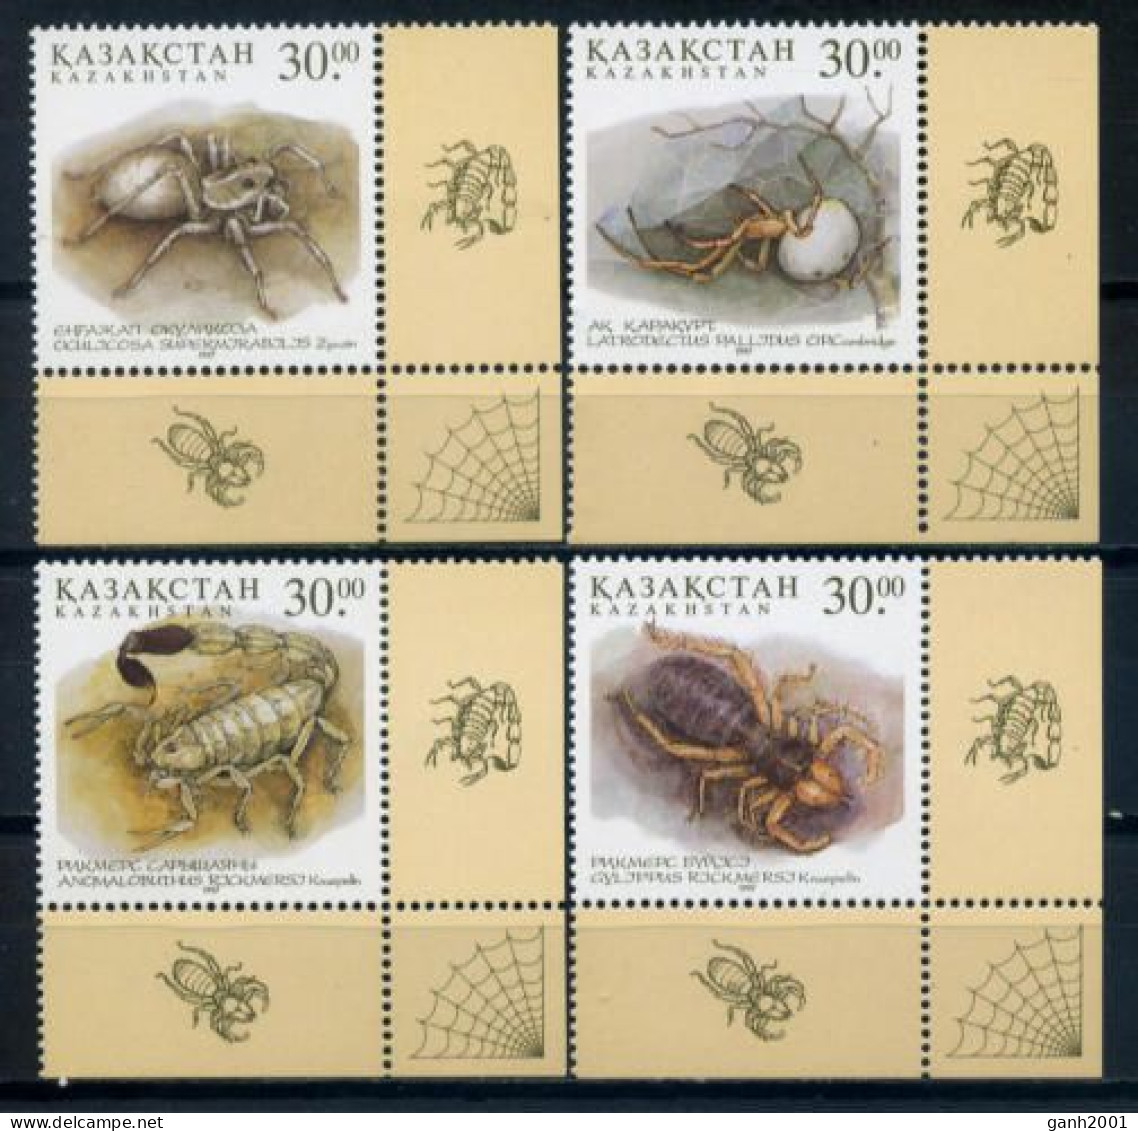 Kazakhstan 1997 / Insects Spiders MNH Insectos Ara&ntilde;as Spinnen / Hi99  2-13 - Spiders